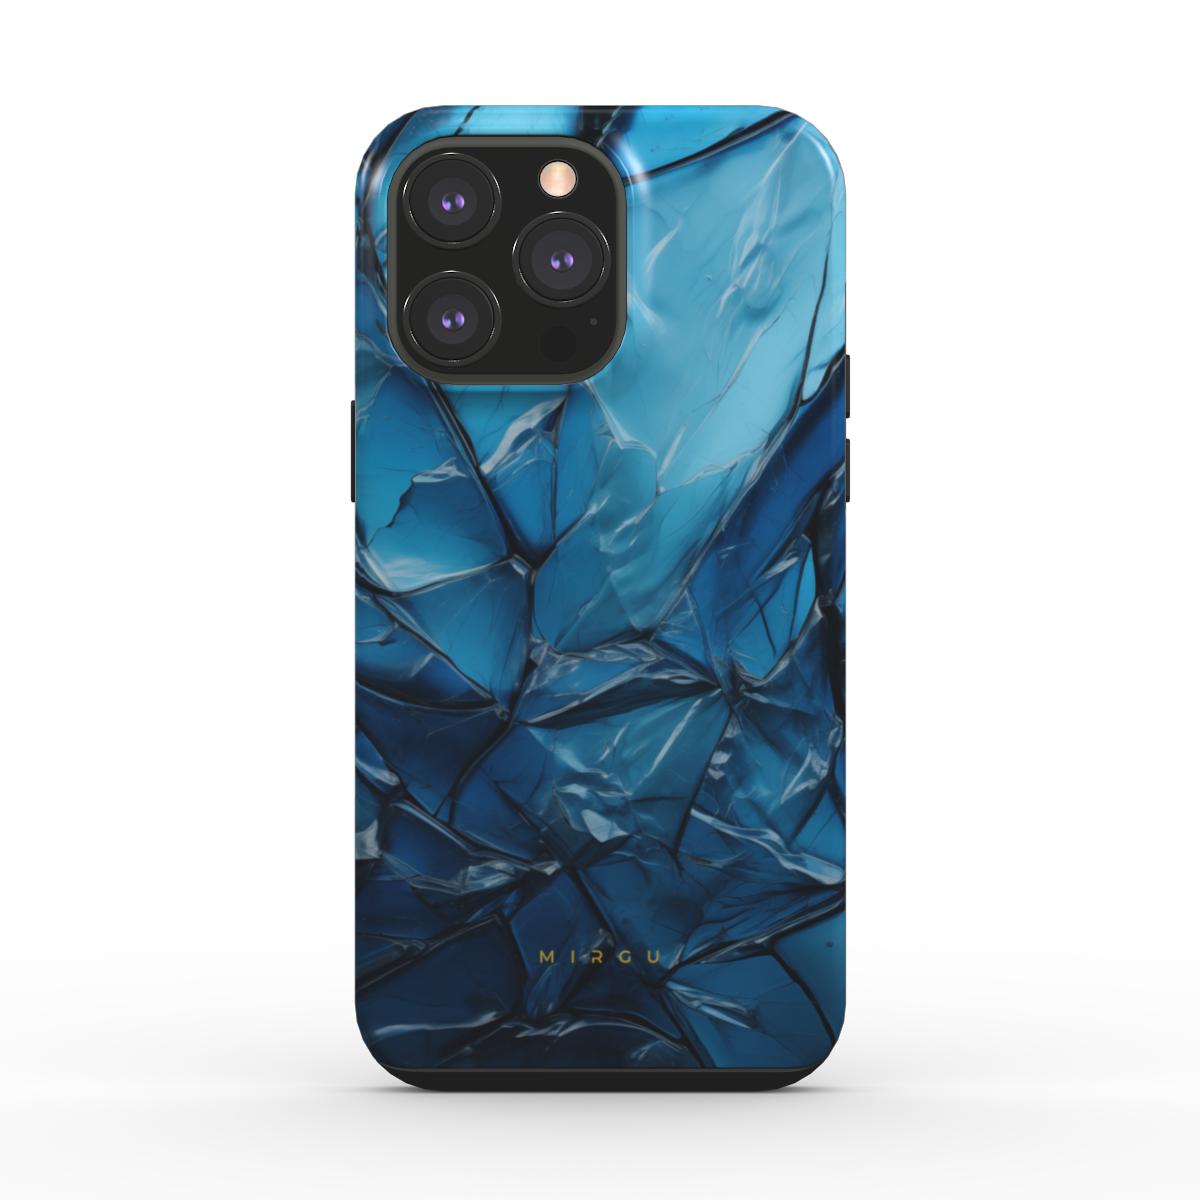 Icy Crystal Planet - Tough Phone Case